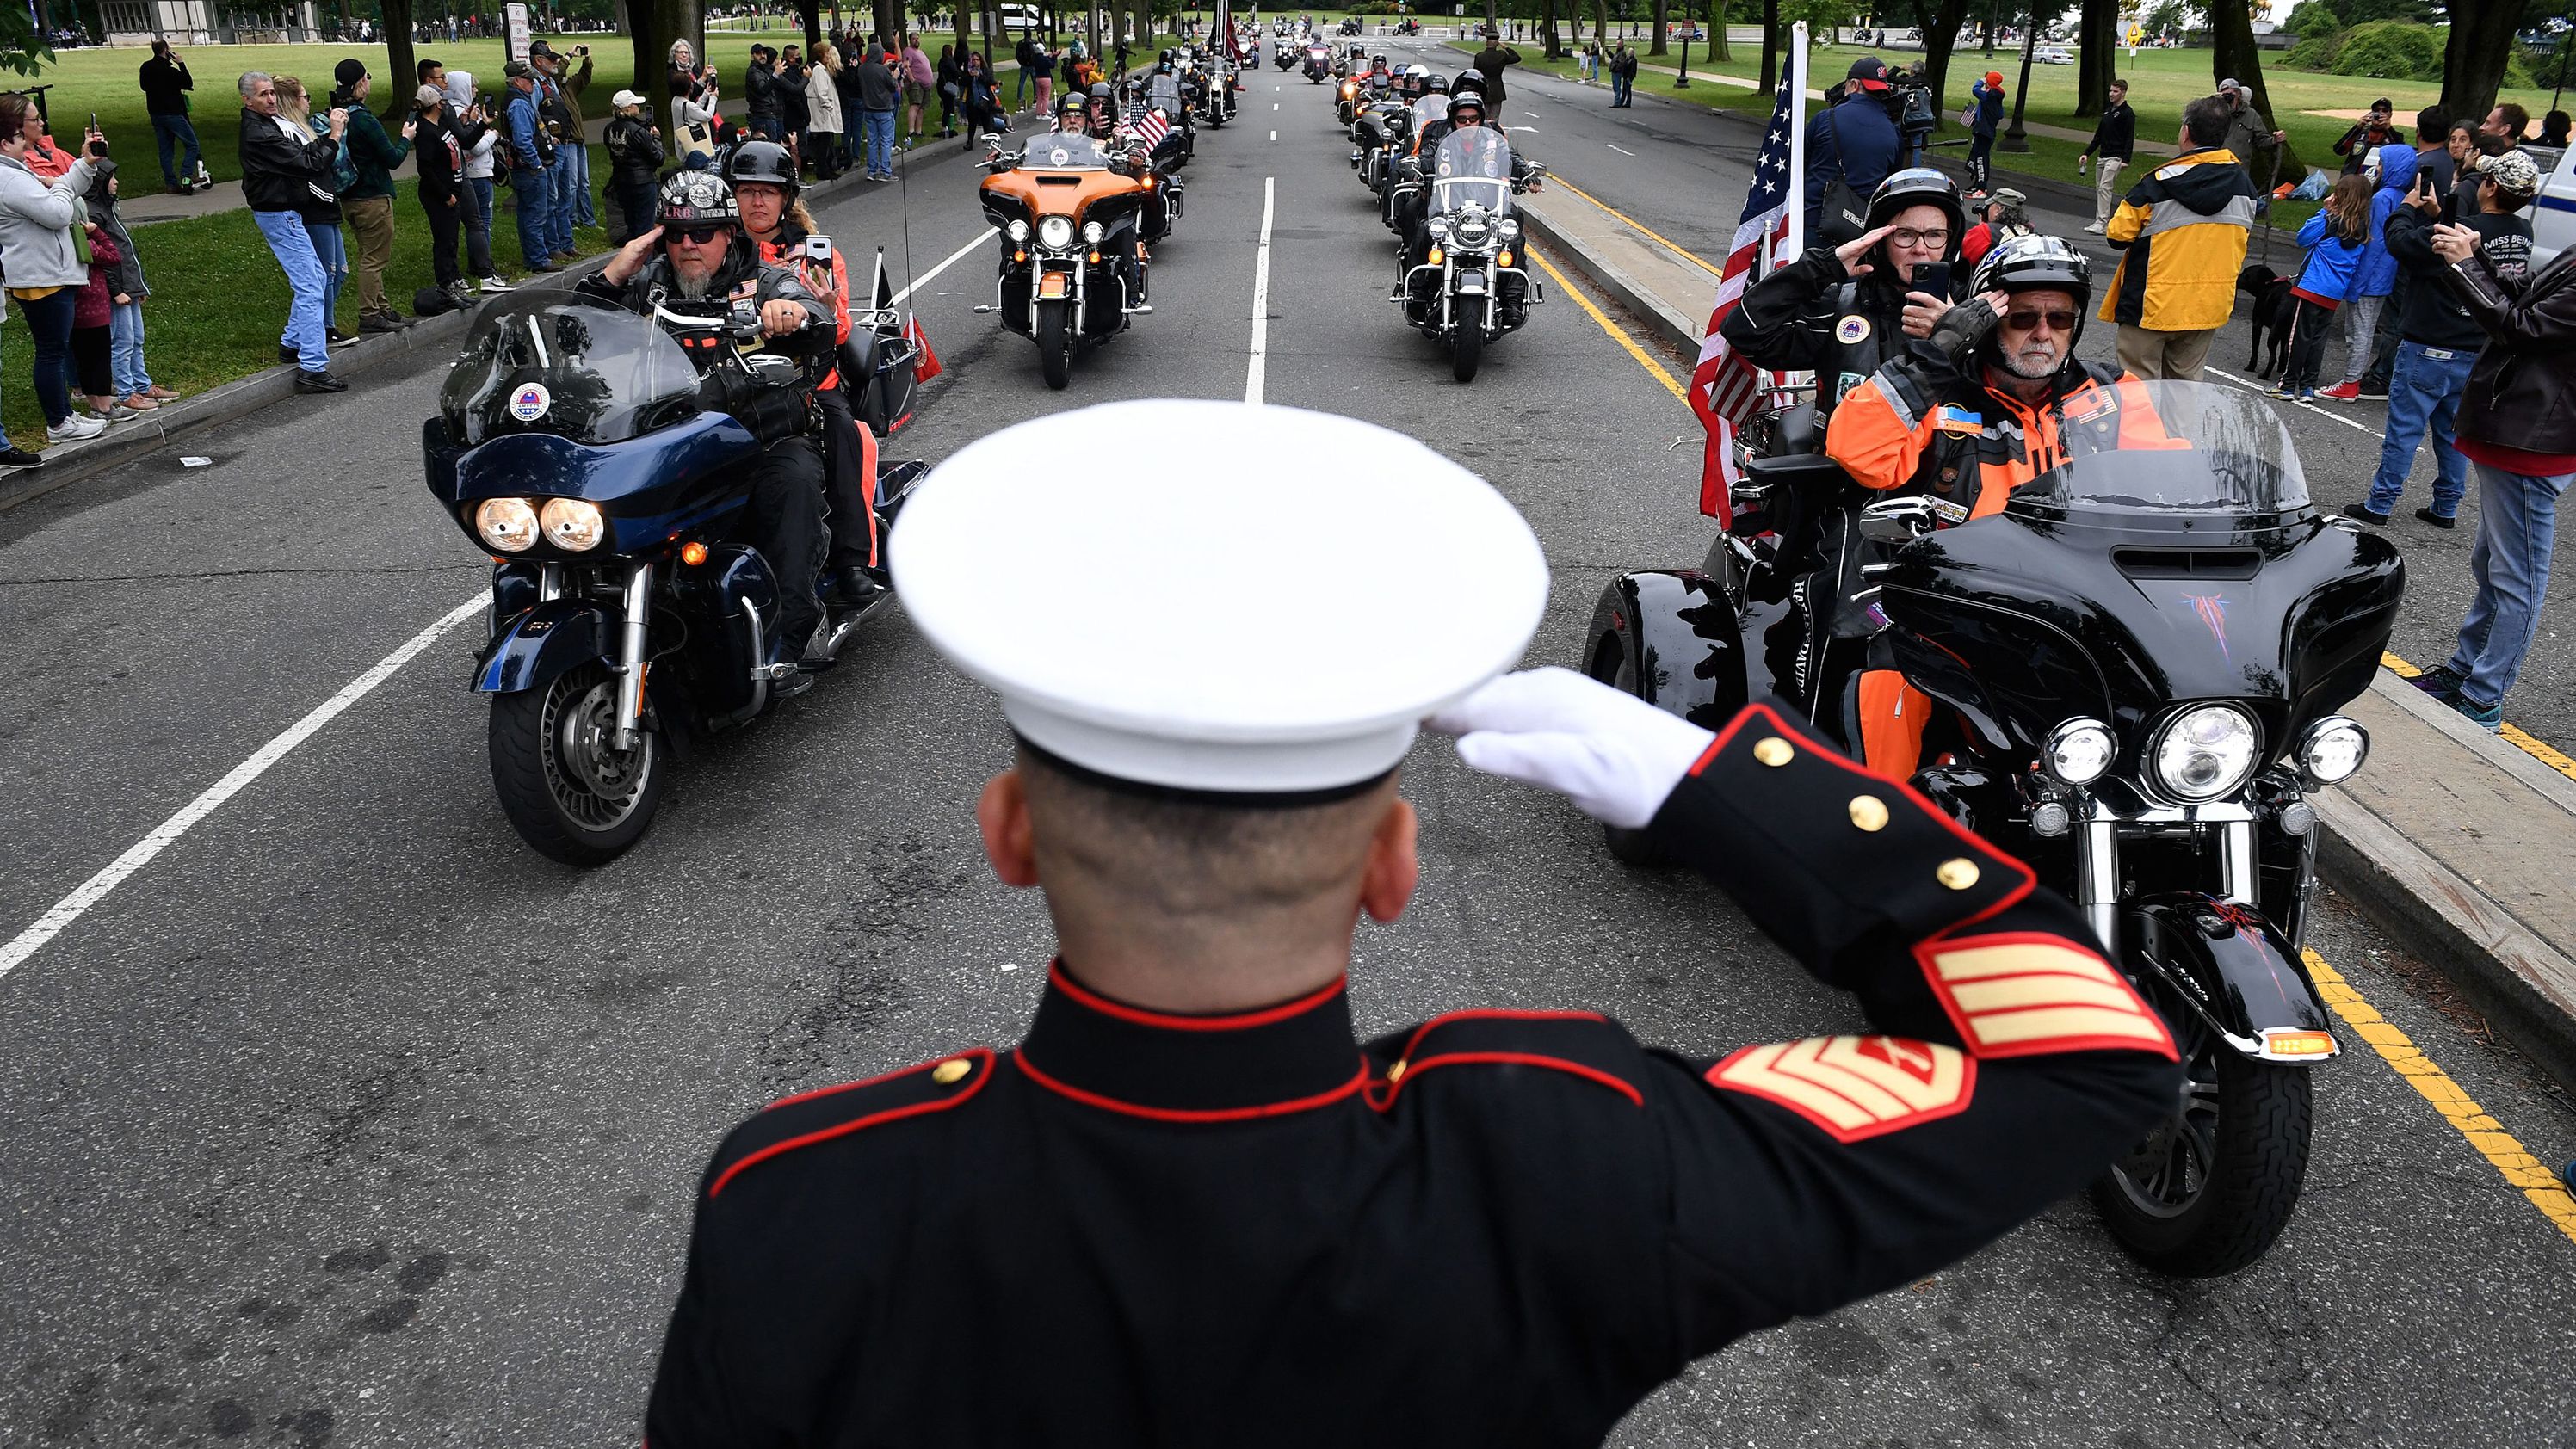 Veteran Tim Chambers salutes motorcyclists participating in the "Rolling to Remember" event in Washington, DC, on Sunday, May 30.